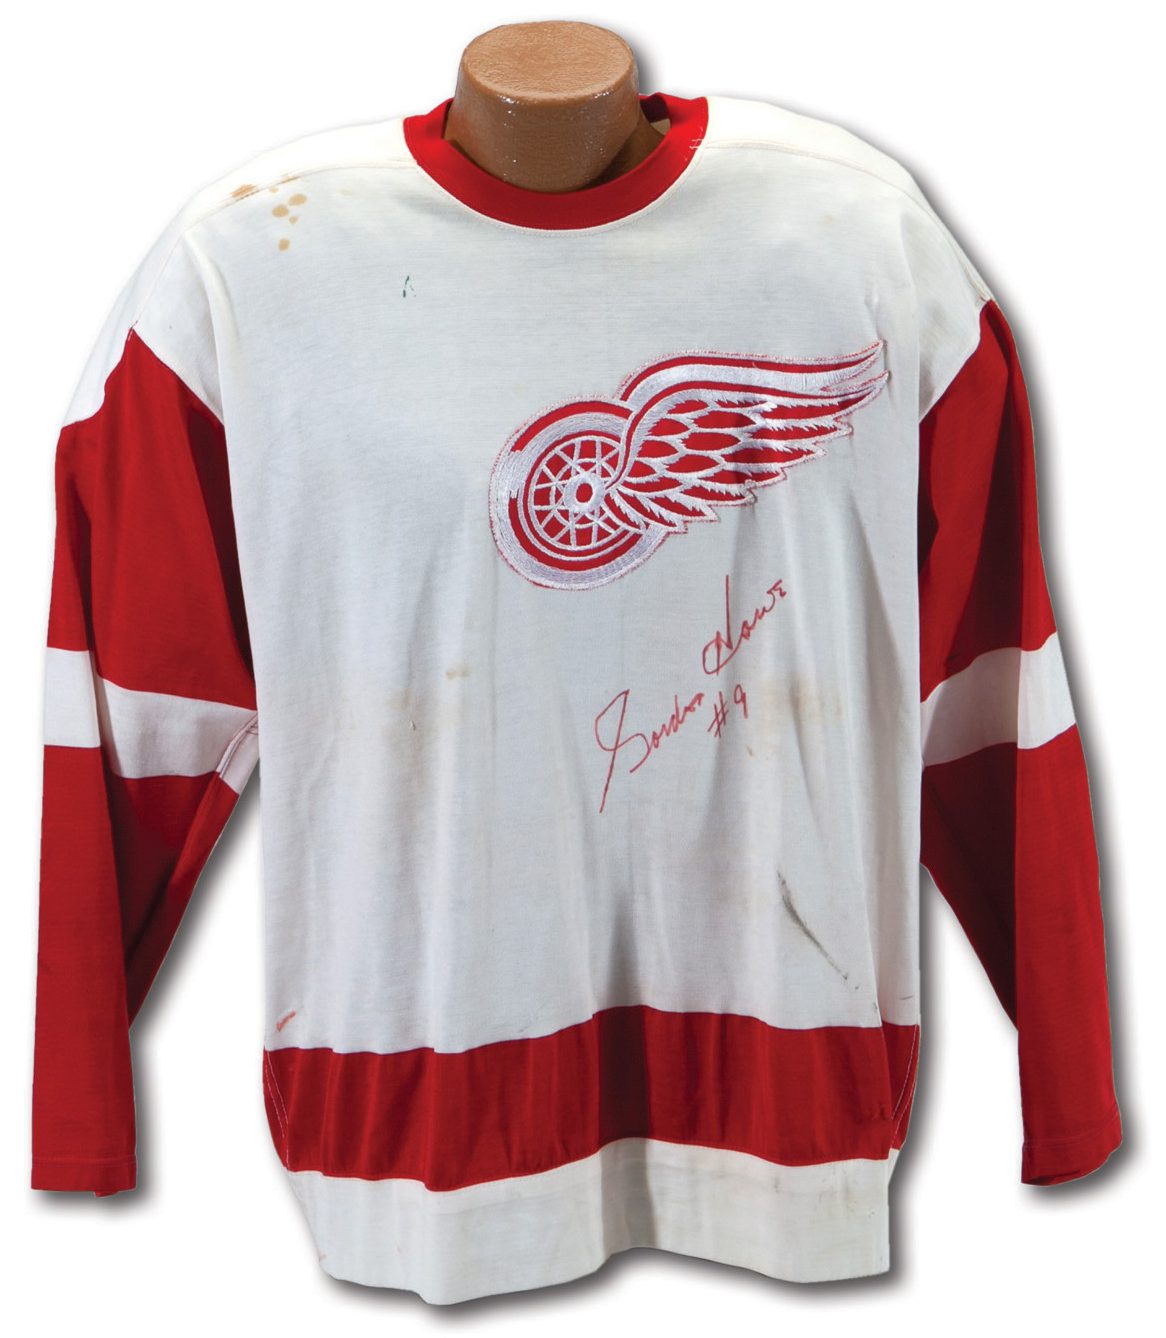 Gordie Howe Signed Sweater. Hockey Collectibles Uniforms, Lot #44174